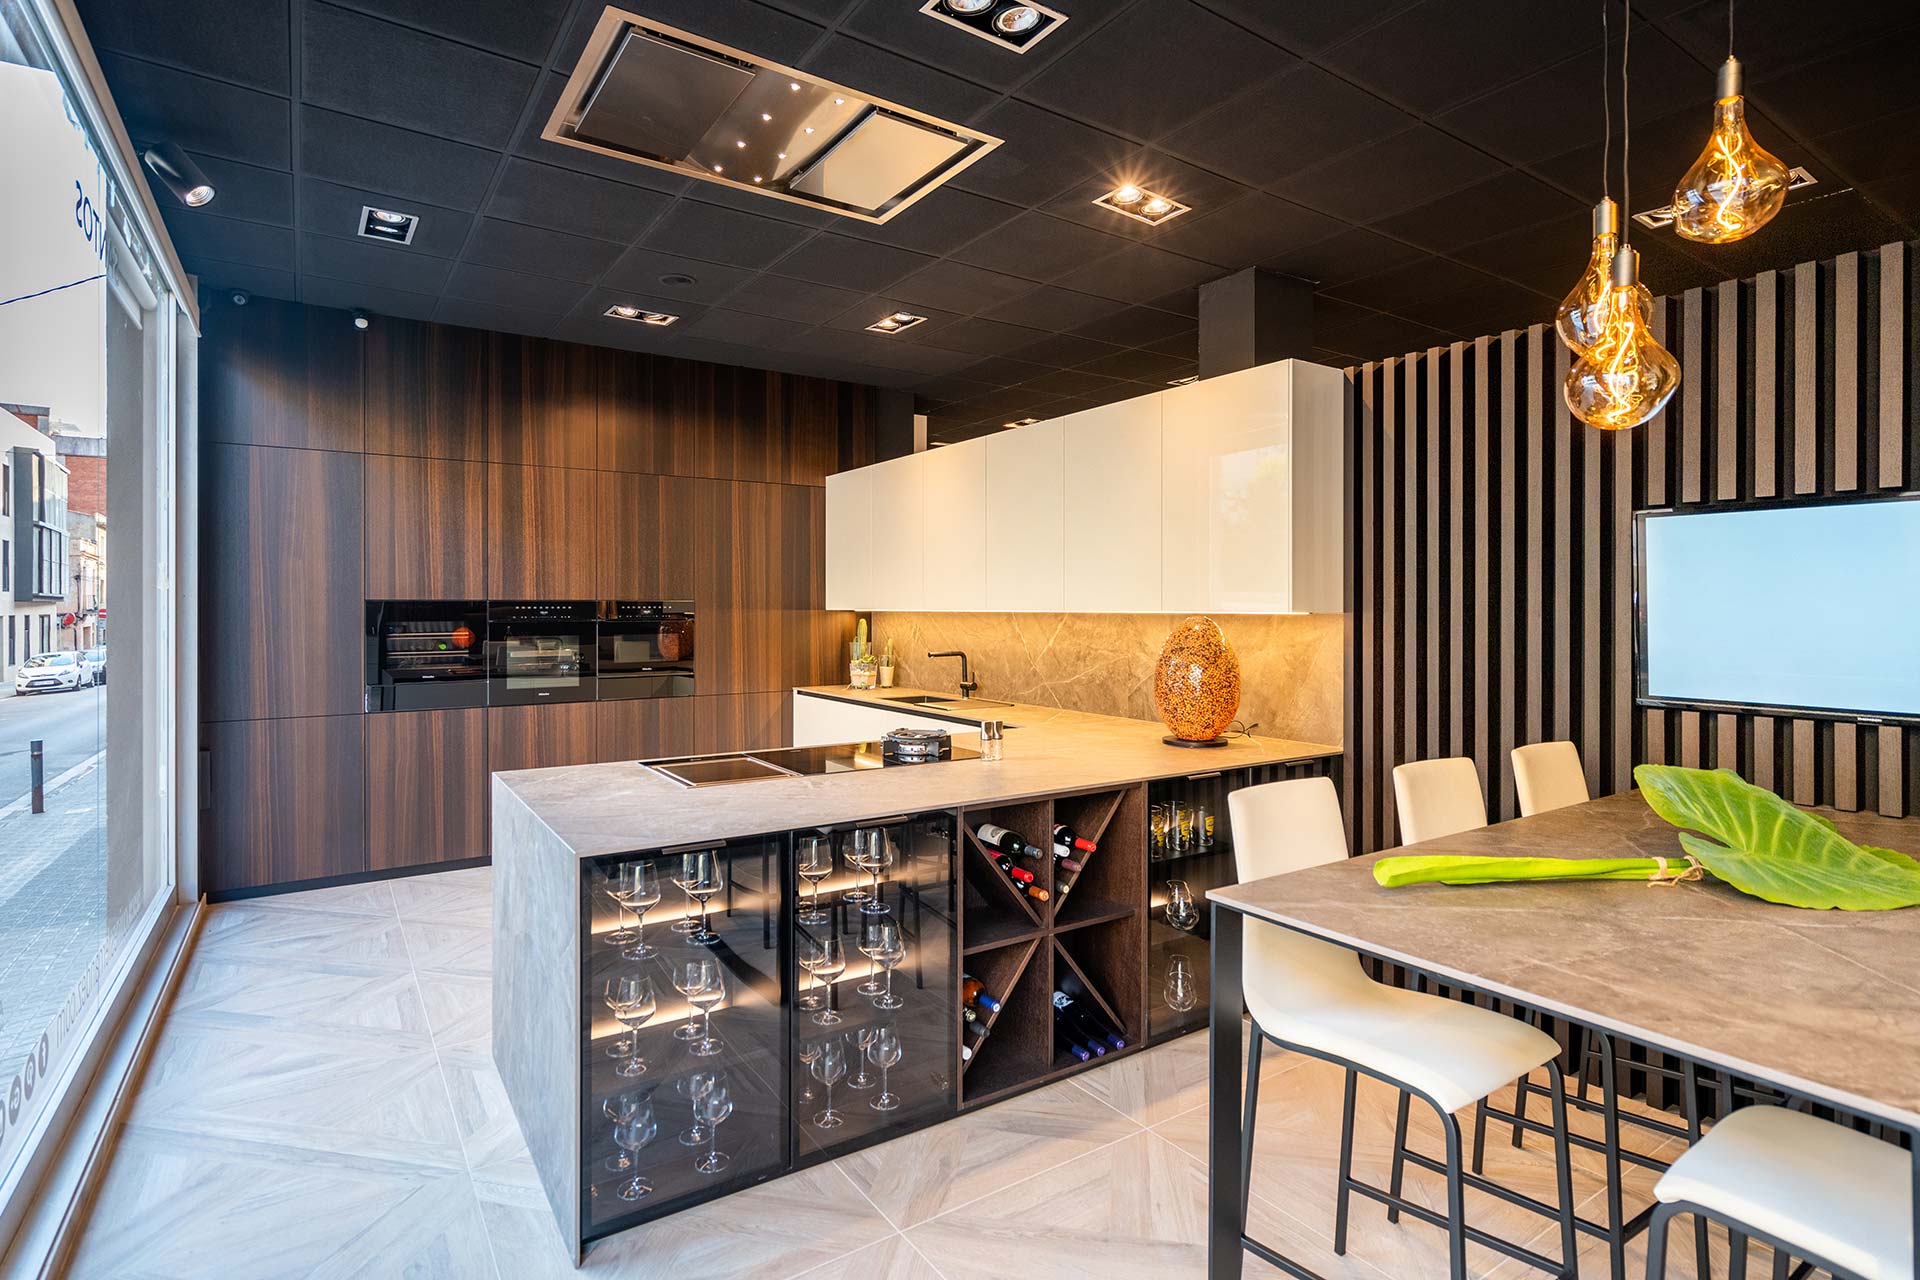 Cuines Fernández, a new and exclusive Santos kitchen showroom